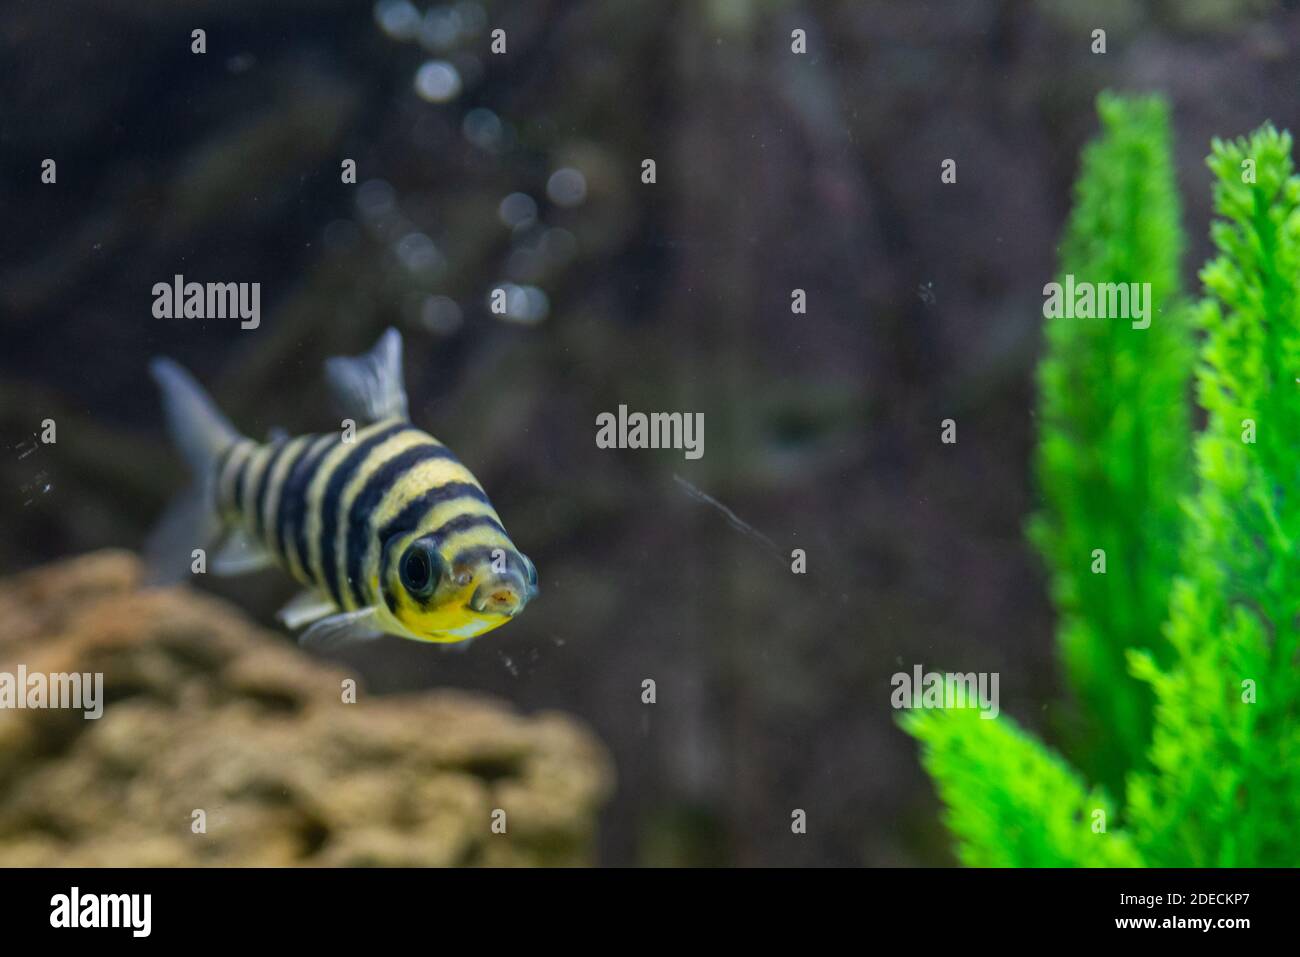 A banded Leporinus against a background of bogwood and plants in aquarium Stock Photo